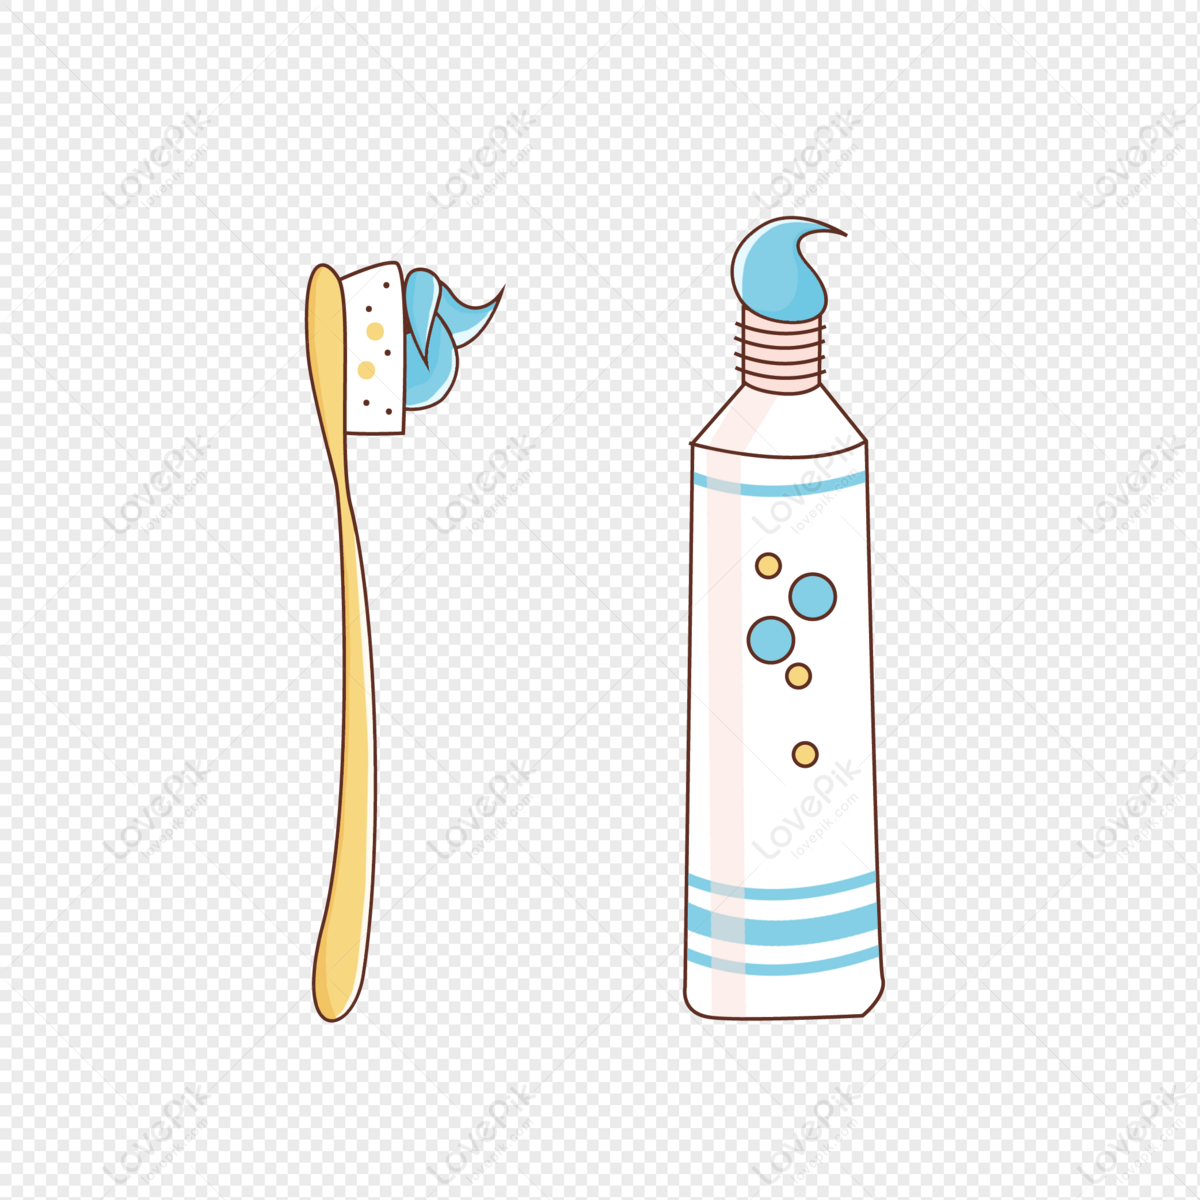 Toothbrush Toothpaste Free Material Free PNG And Clipart Image For Free  Download - Lovepik | 401154549